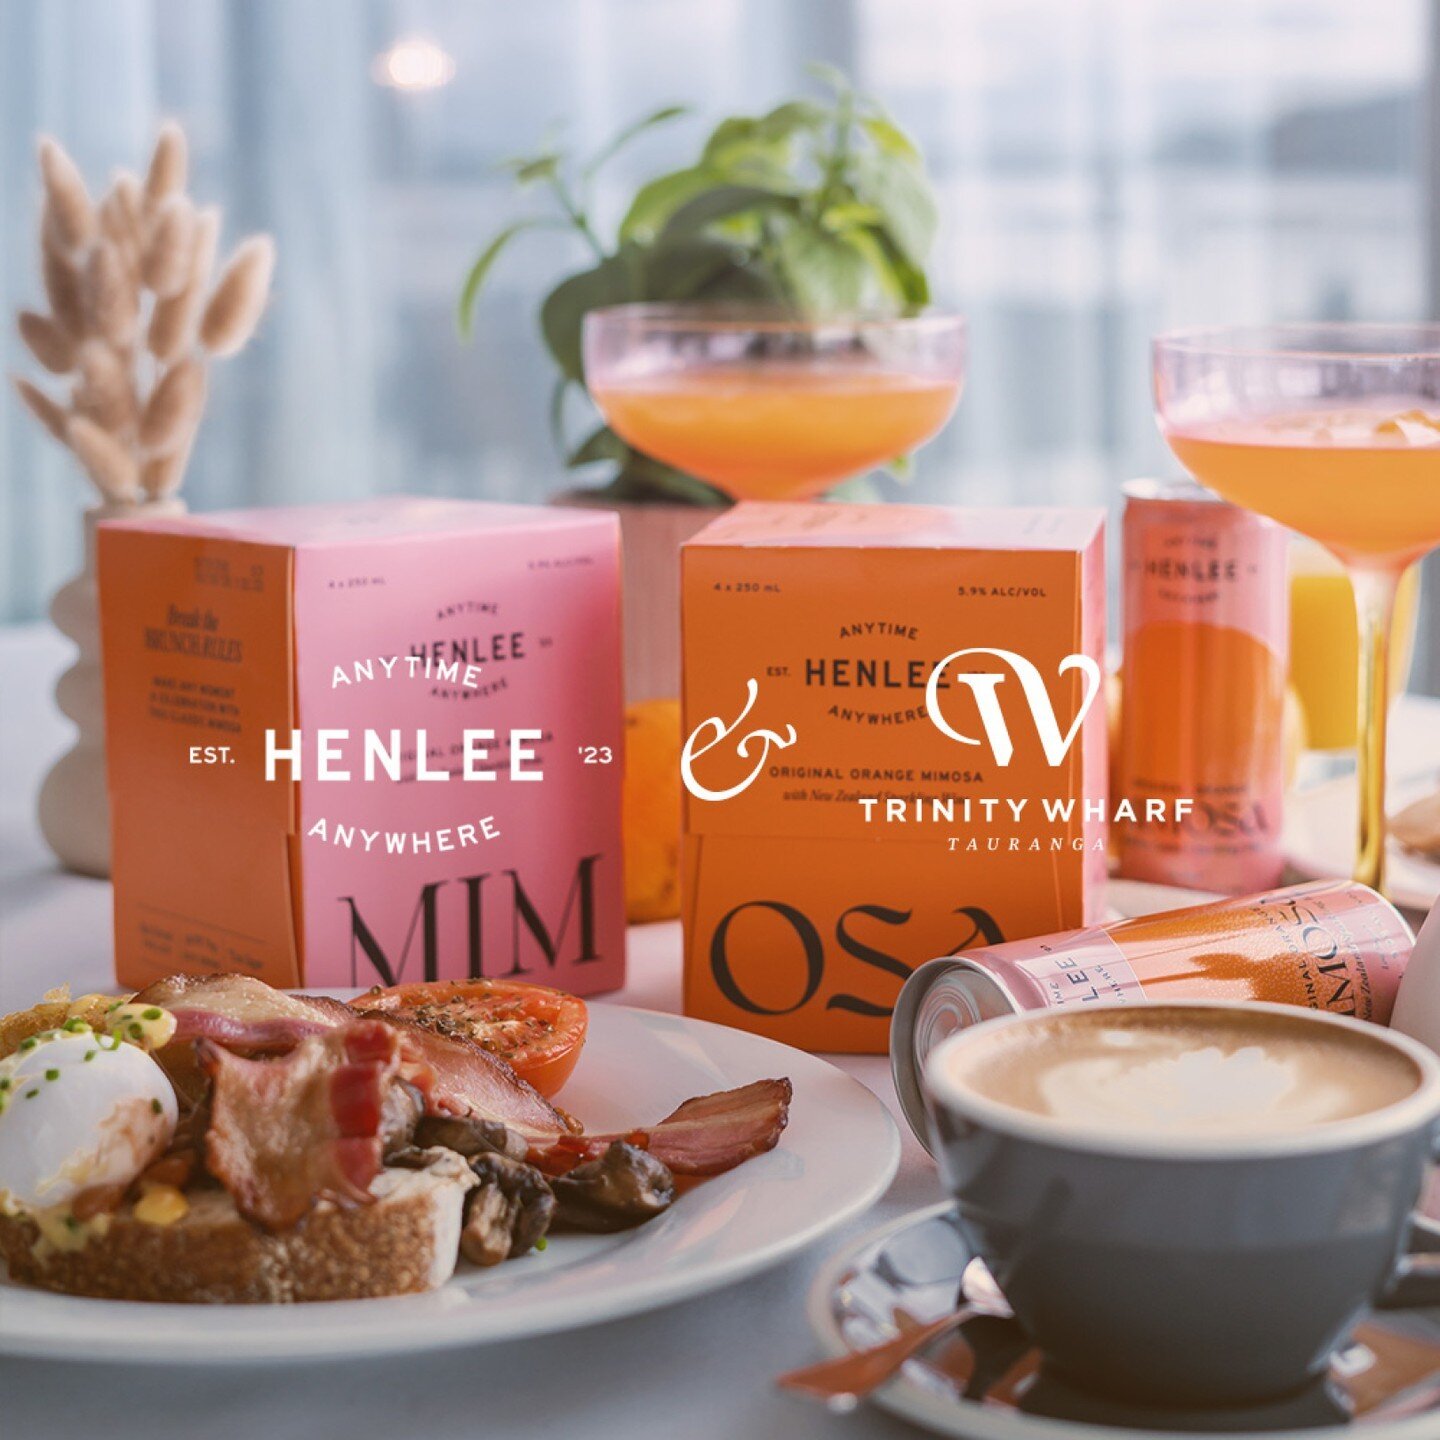 Easter plans? We have teamed up with @drink_henlee to bring you a fun and delicious Easter brunch.

Enjoy the laid-back atmosphere by the water&rsquo;s edge at Trinity Wharf&rsquo;s restaurant, featuring stunning views of the harbour through floor-to